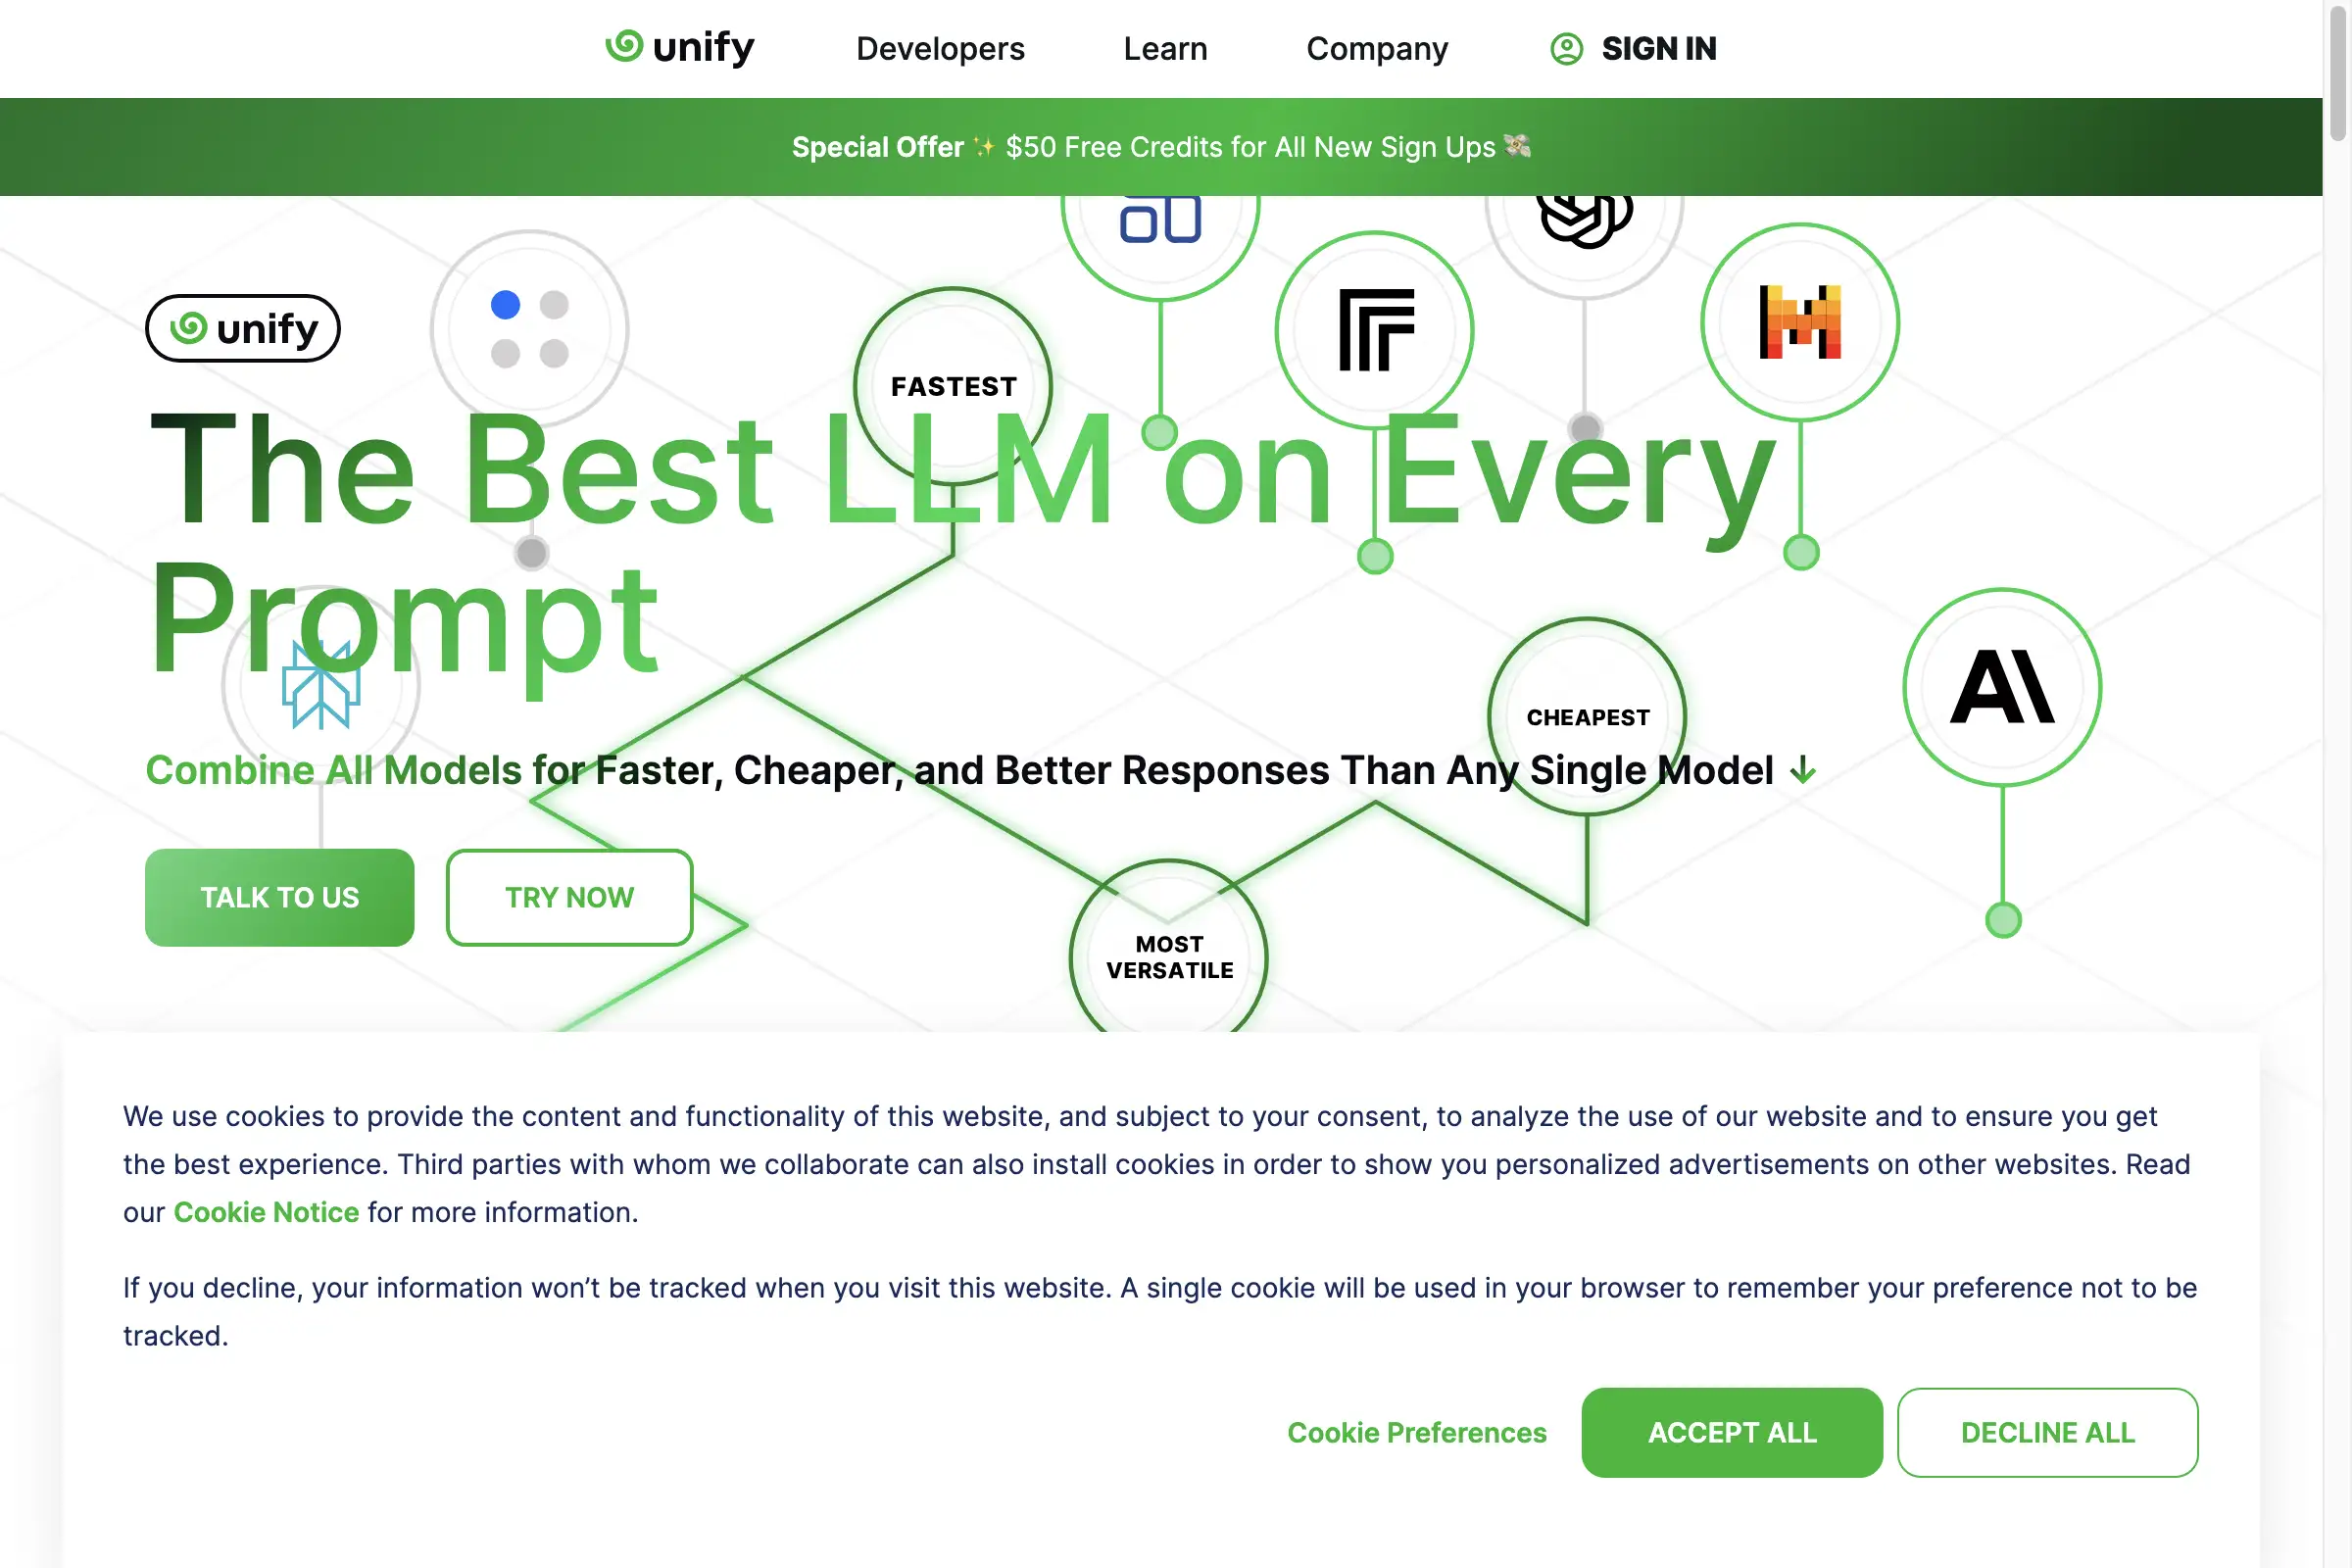 Unify: The Best LLM on Every Prompt